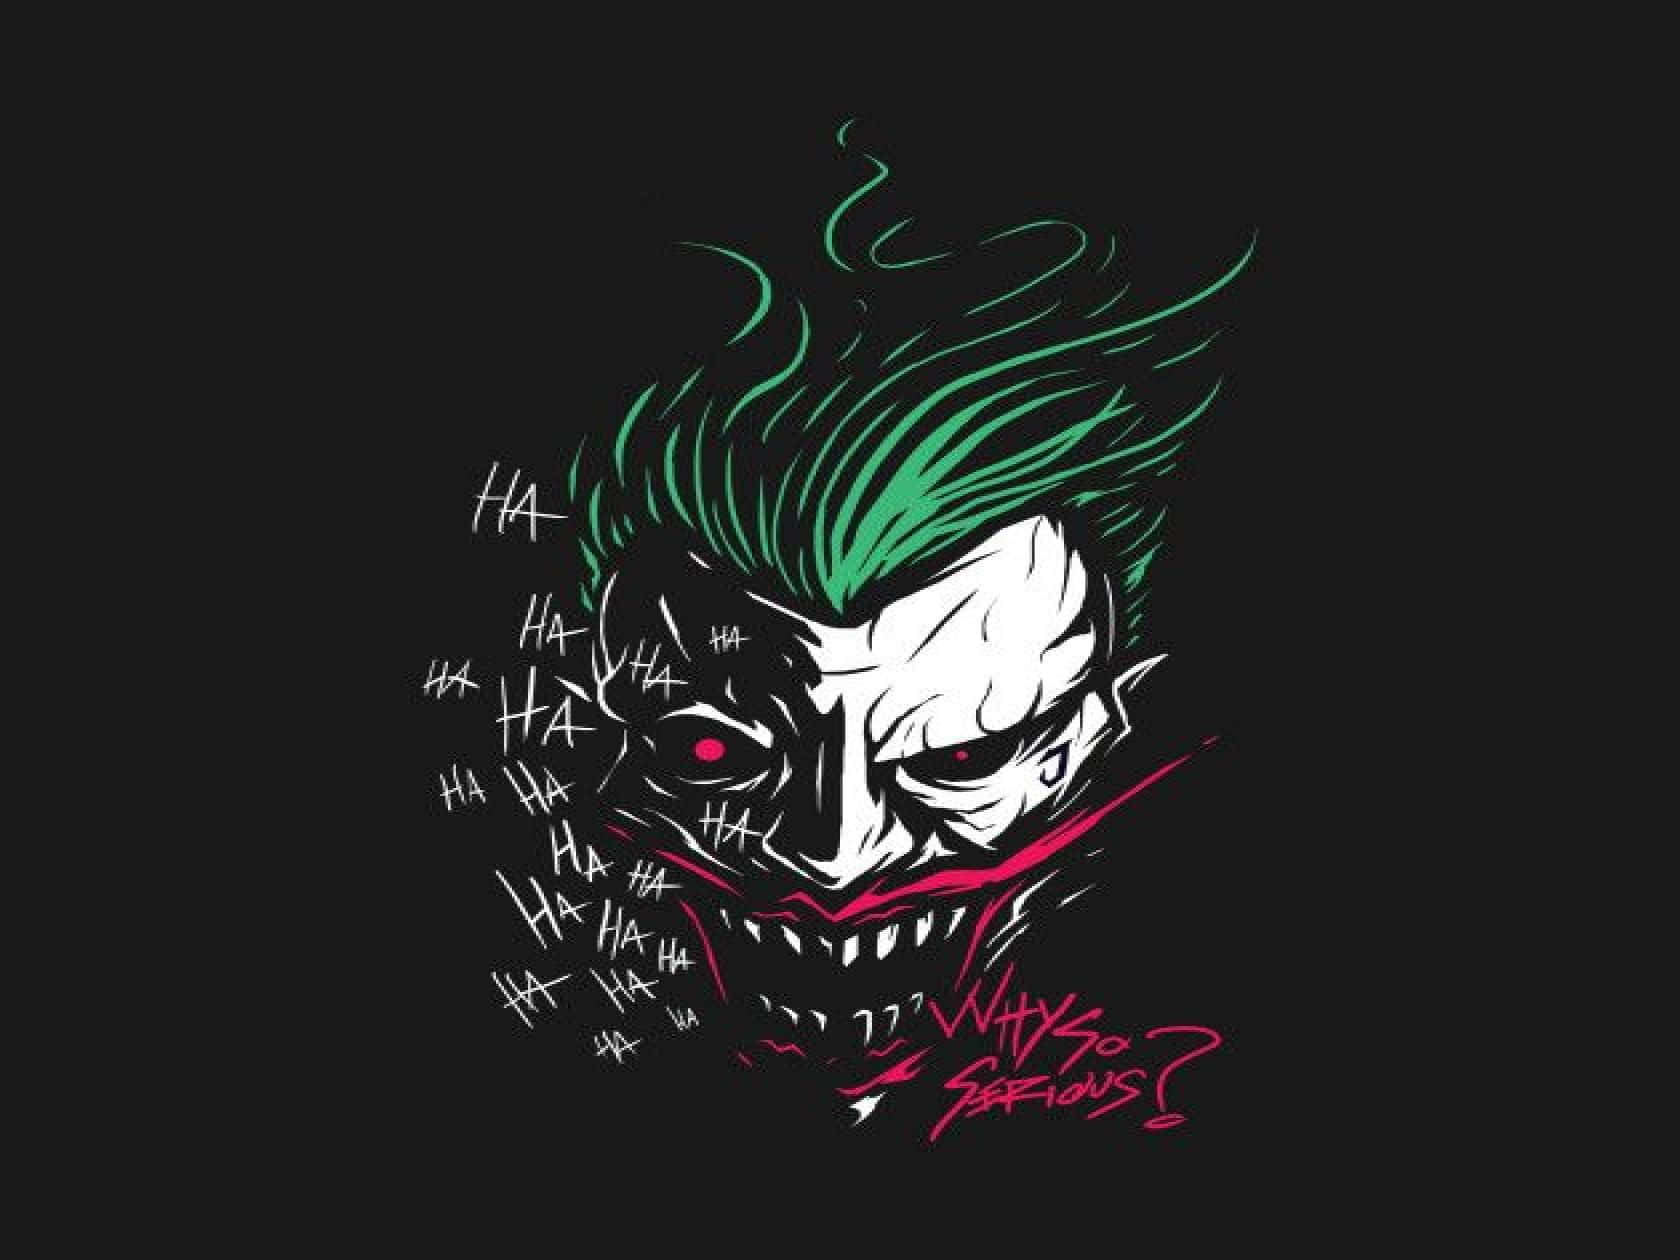 Maniacal Laughter Of The Iconic Joker